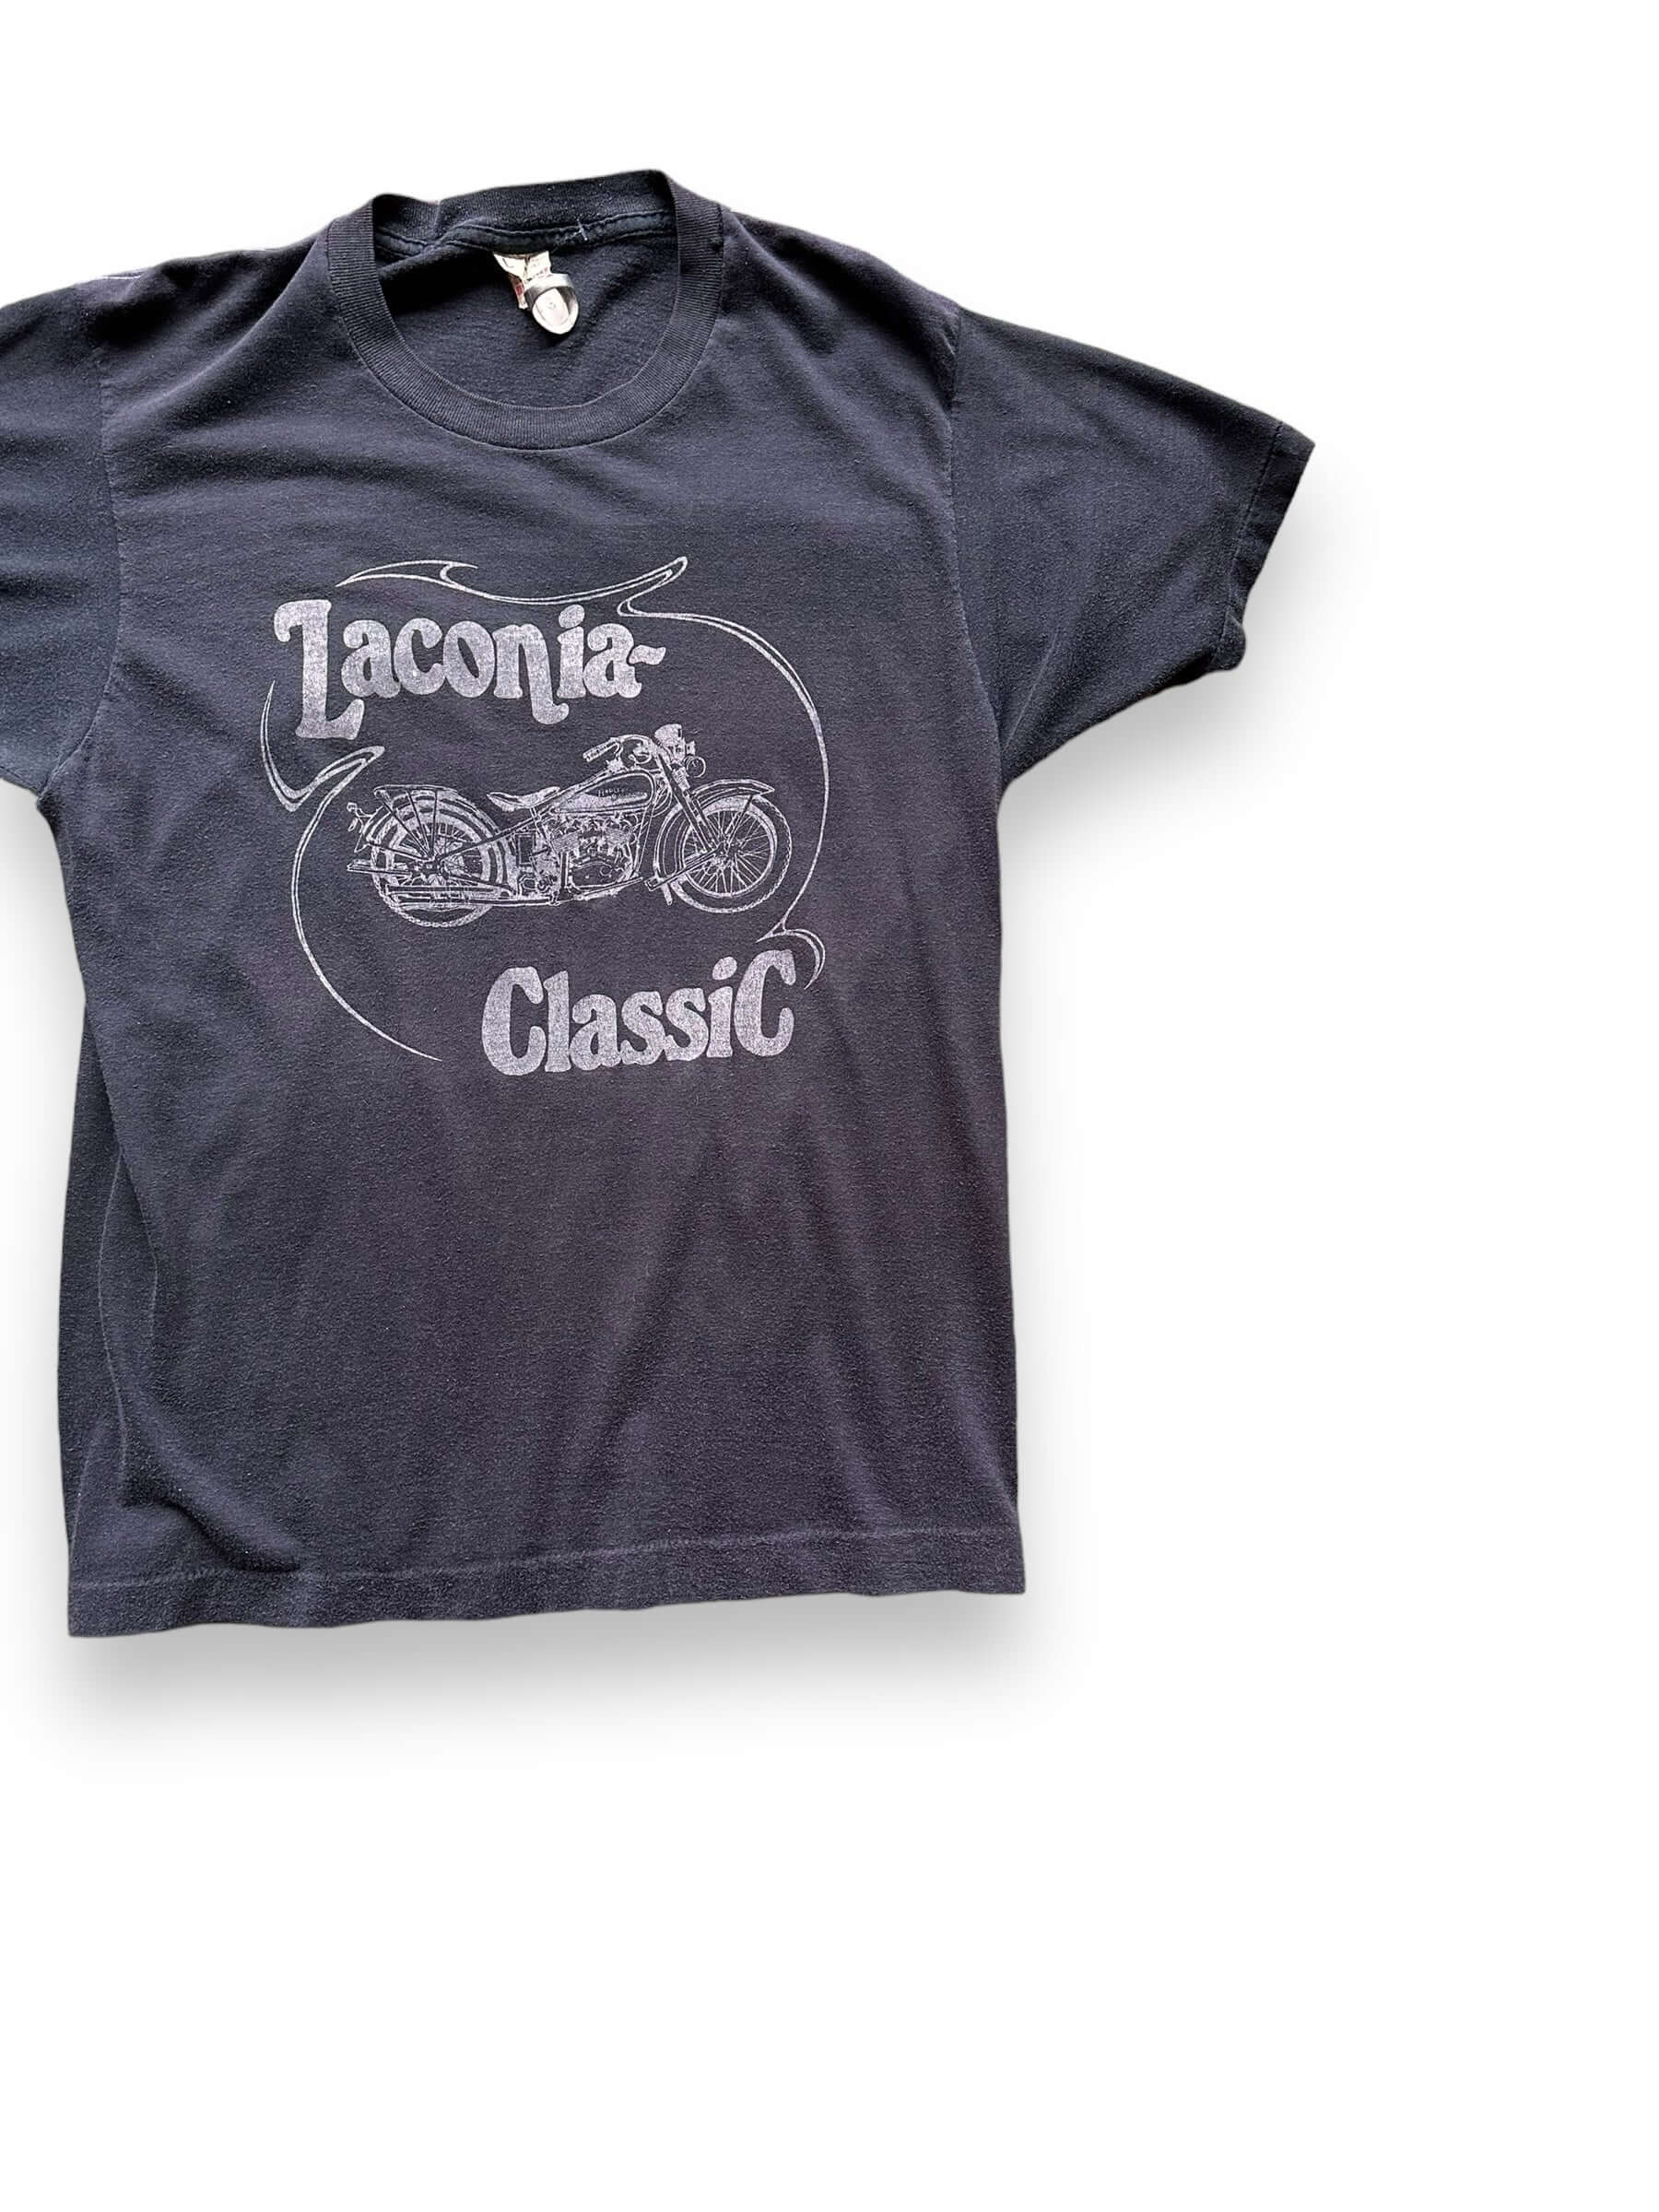 Front Left View of Vintage Laconia Motorcycle Classic Tee SZ L | Vintage Harley Tee Seattle